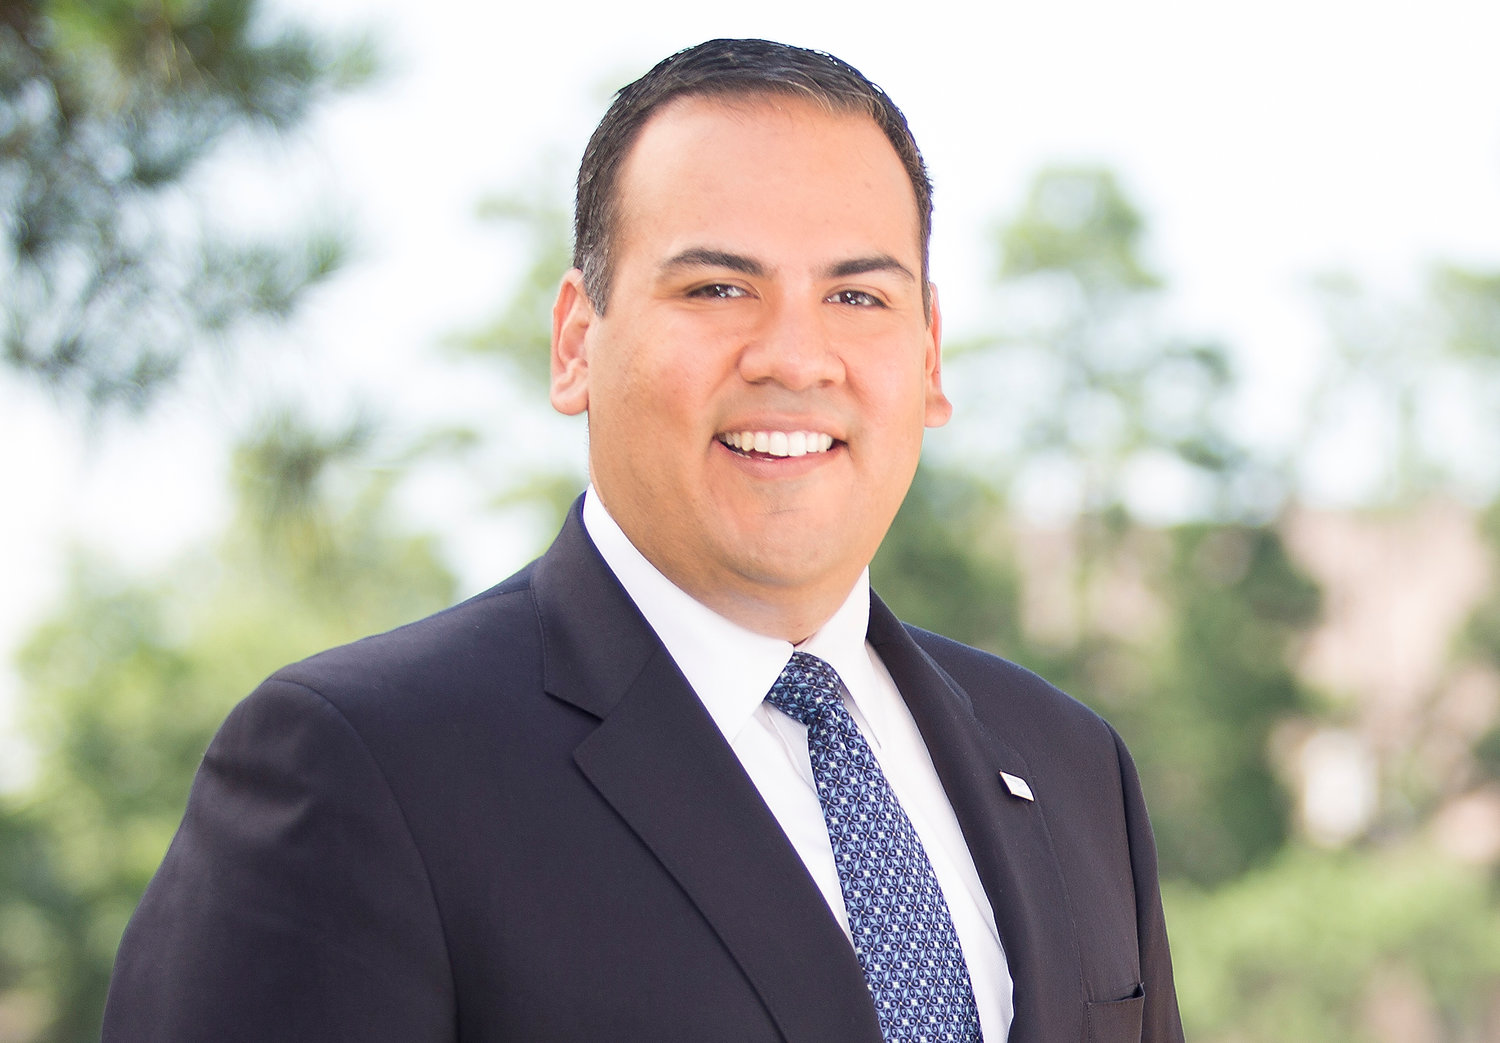 David Argueta comes to Mercy Hospitals Springfield from his position as chief administrative officer in Oklahoma City.